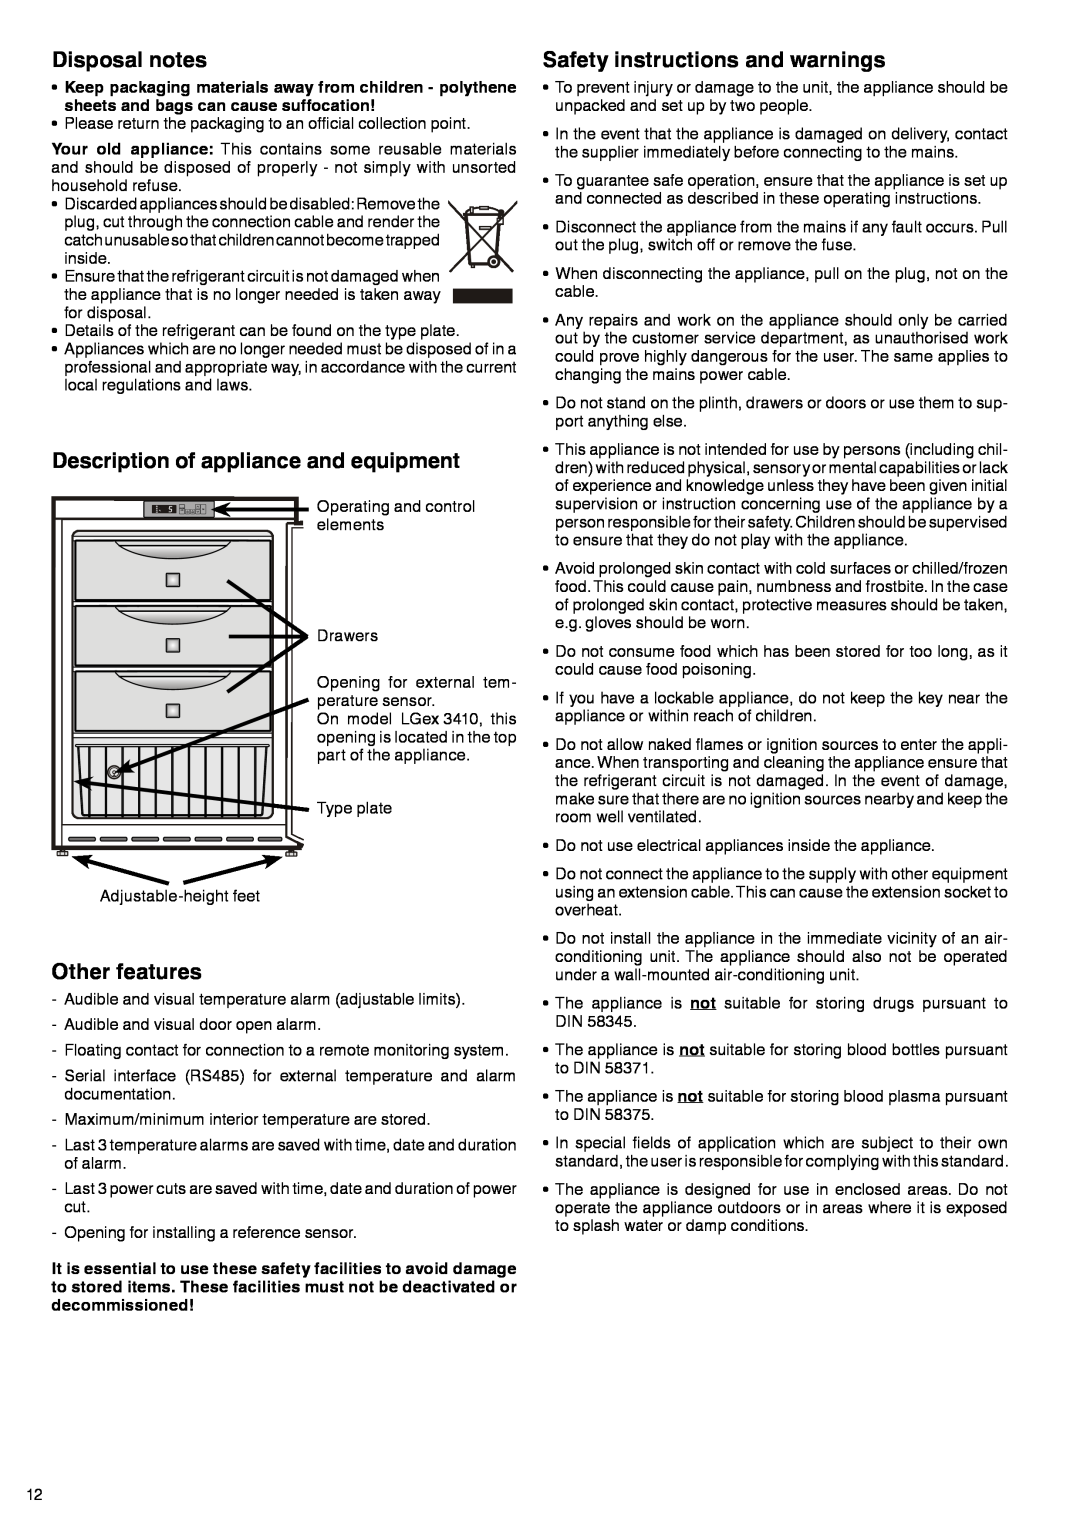 Liebherr LGex 910 Disposal notes, Description of appliance and equipment, Other features, Safety instructions and warnings 